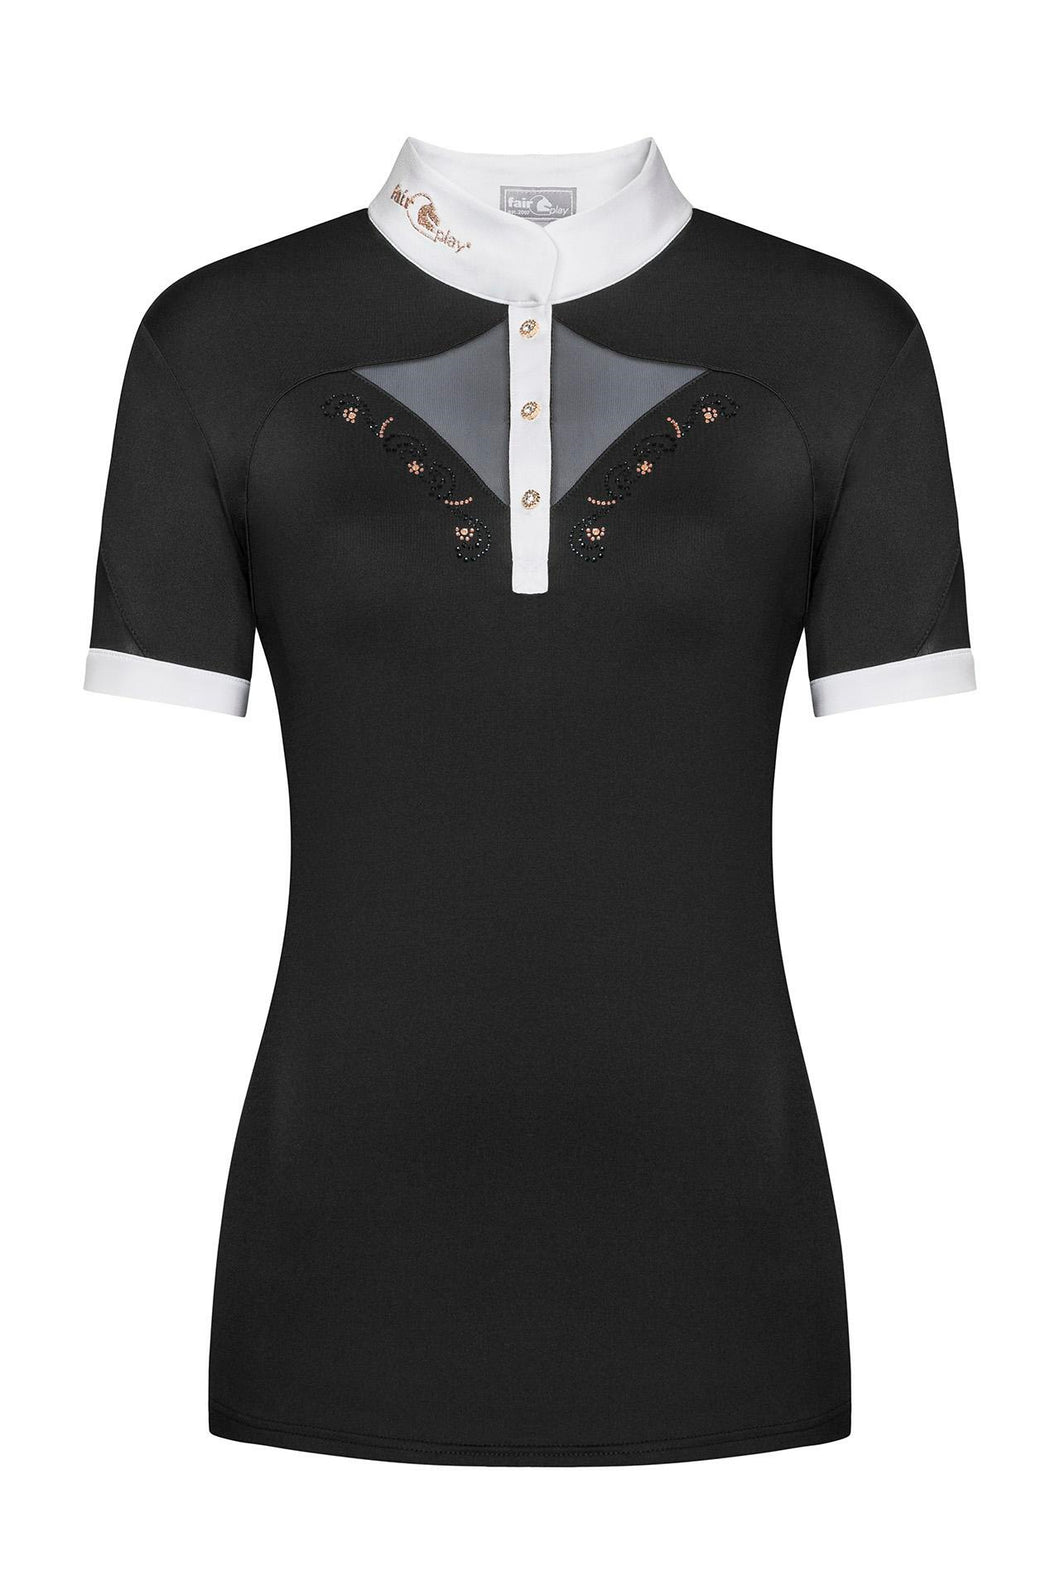 Fair Play Competition Shirt CATHRINE ROSEGOLD SS, Black-White